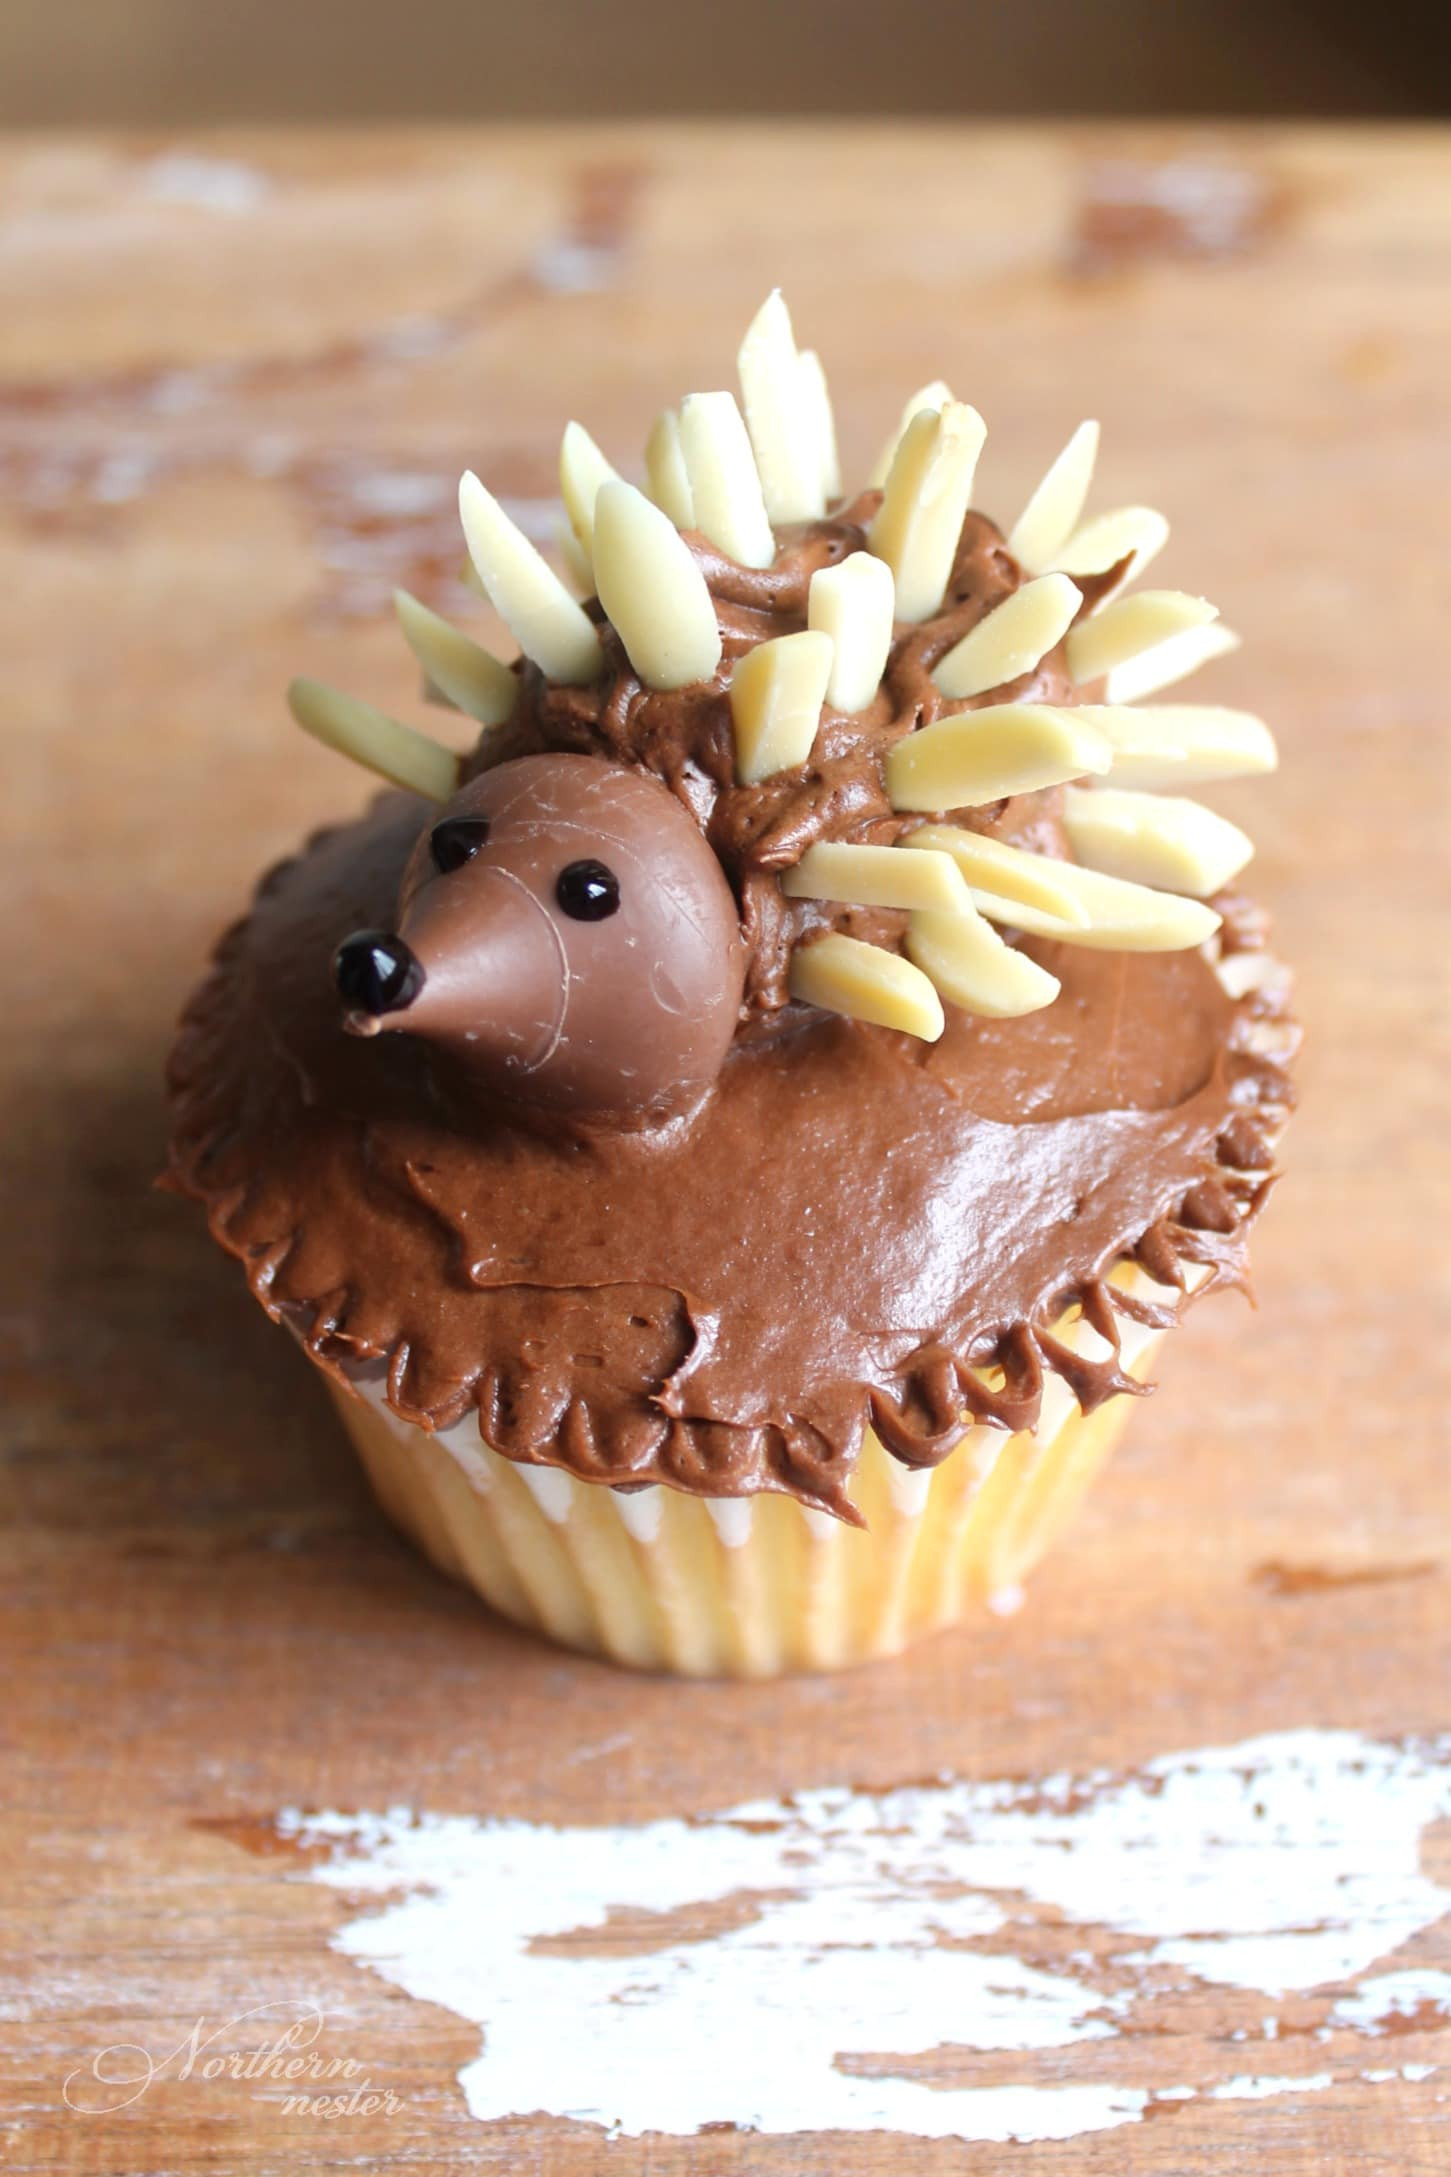 The top 15 Ideas About Cupcakes for Kids